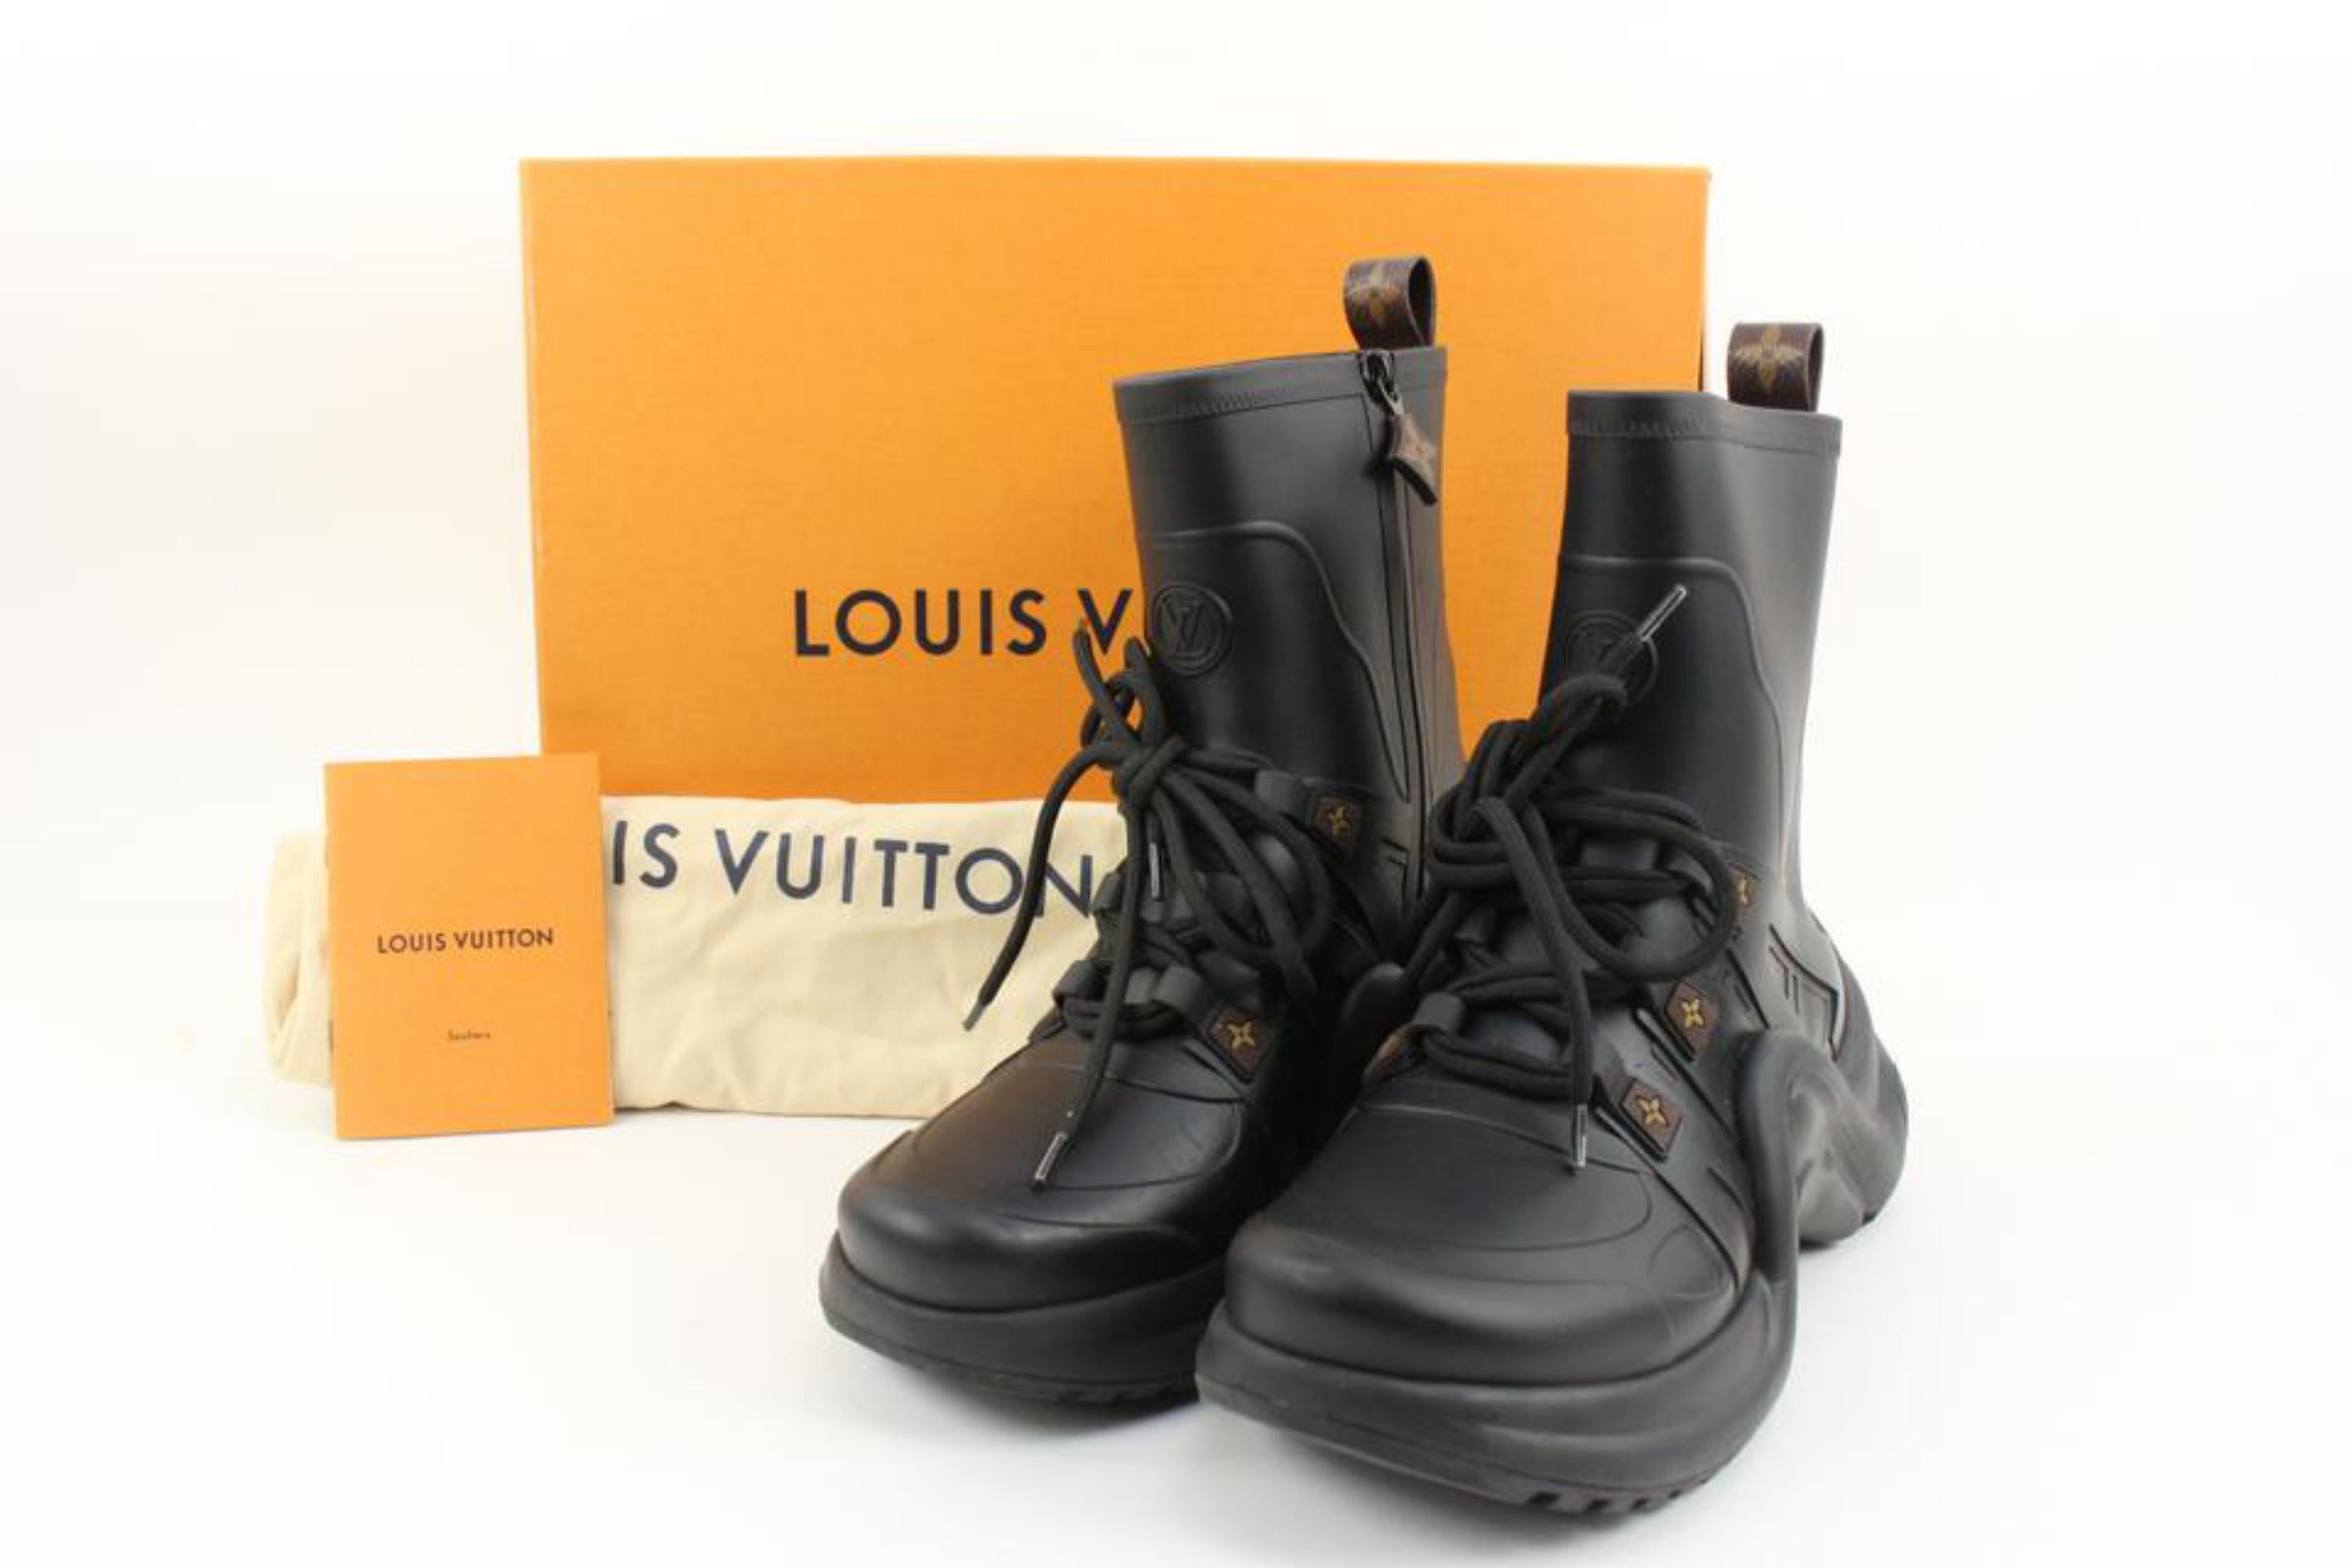 Louis Vuitton Women's 38 Mat Rubber Monogram LV Archlight Sneaker Boots 76lv218s
Date Code/Serial Number: Sxxxxx (Extremely Faded)
Made In: Italy
Measurements: Length:  11.5